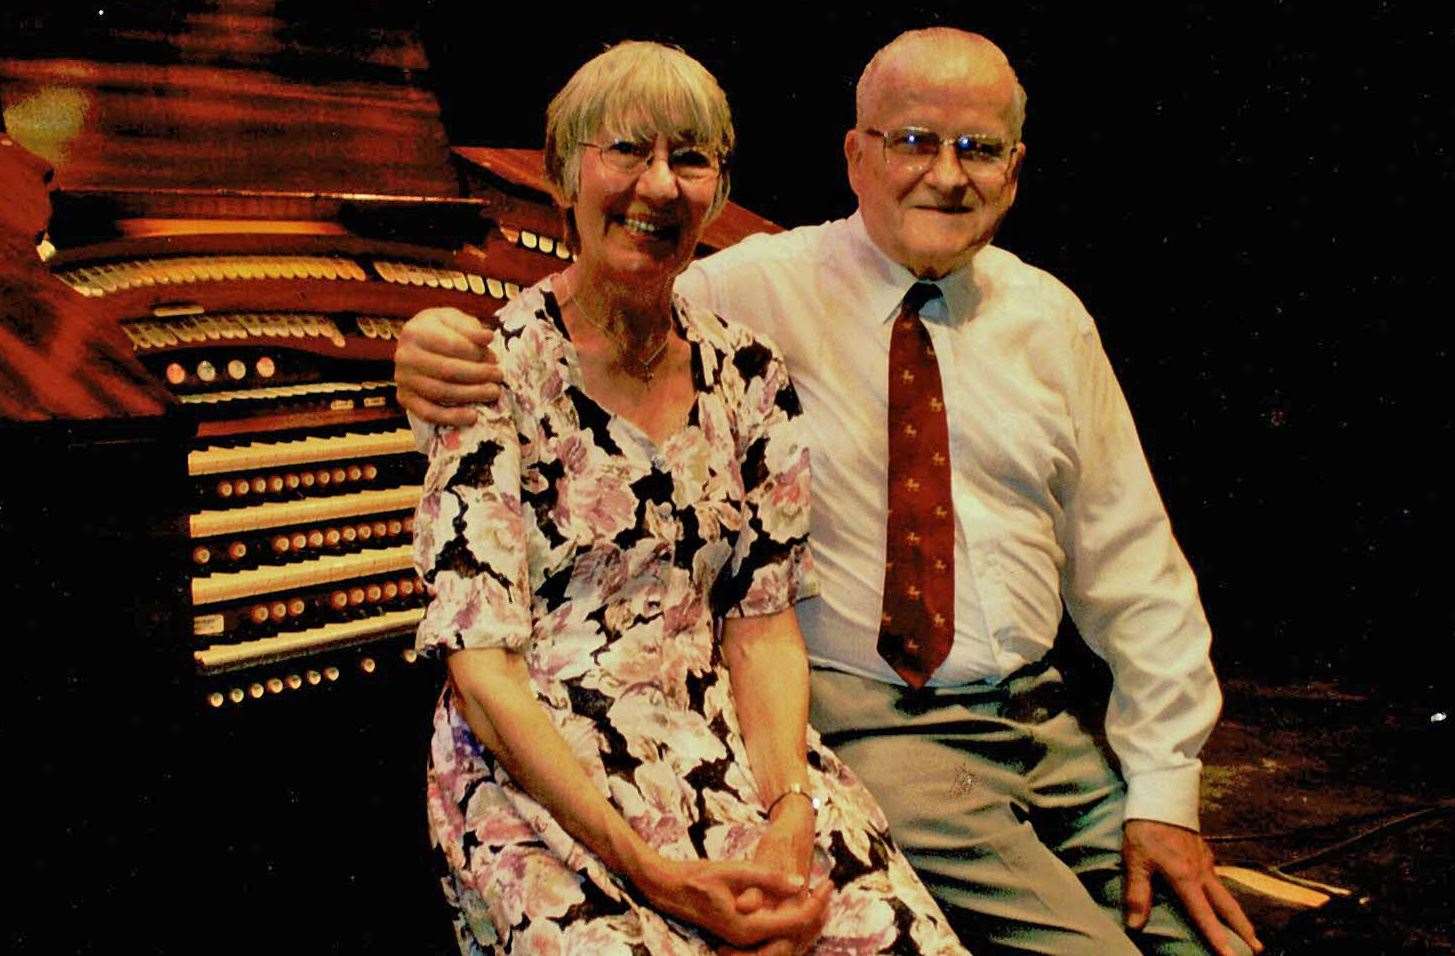 Bob Caudwell, choirmaster and organist at St Nicholas Church in Linton, is pictured here with partner Margaret Howe on his ninetieth birthday